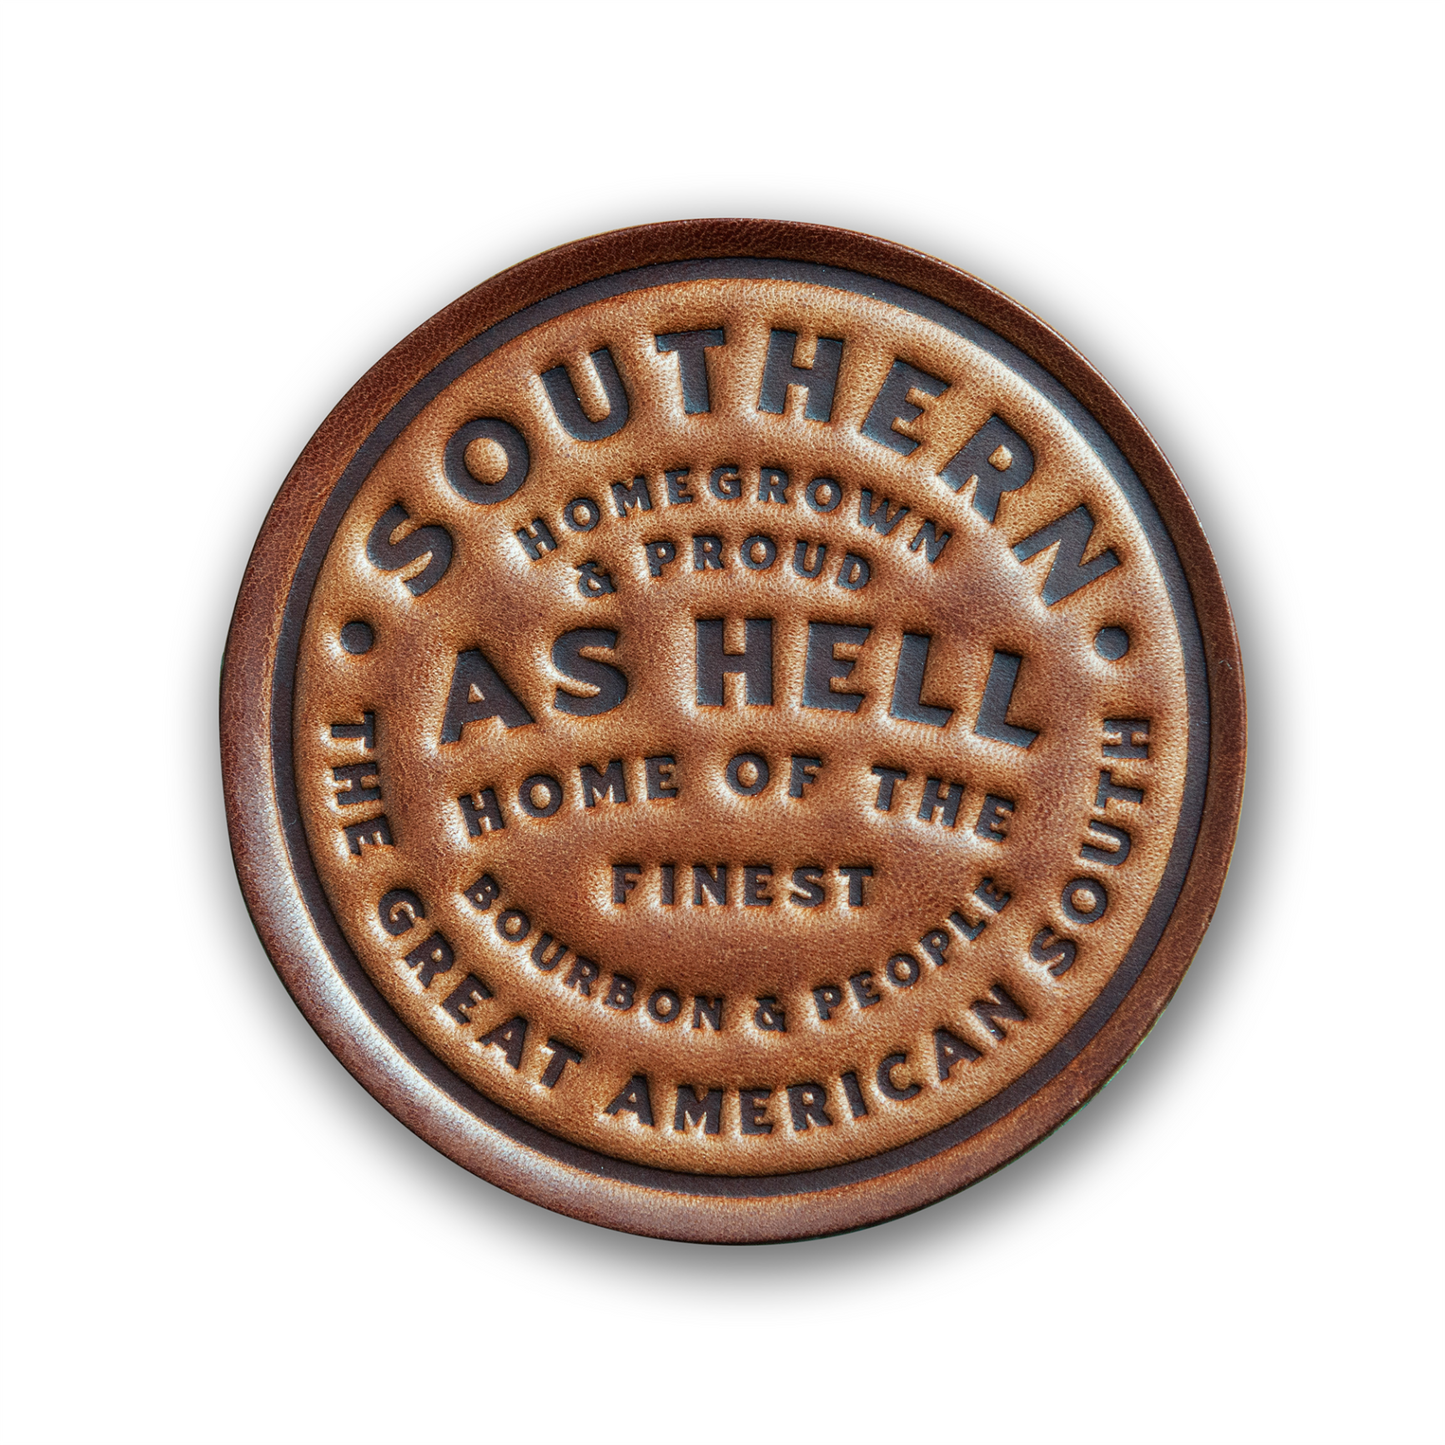 SOUTHERN AS HELL COASTER